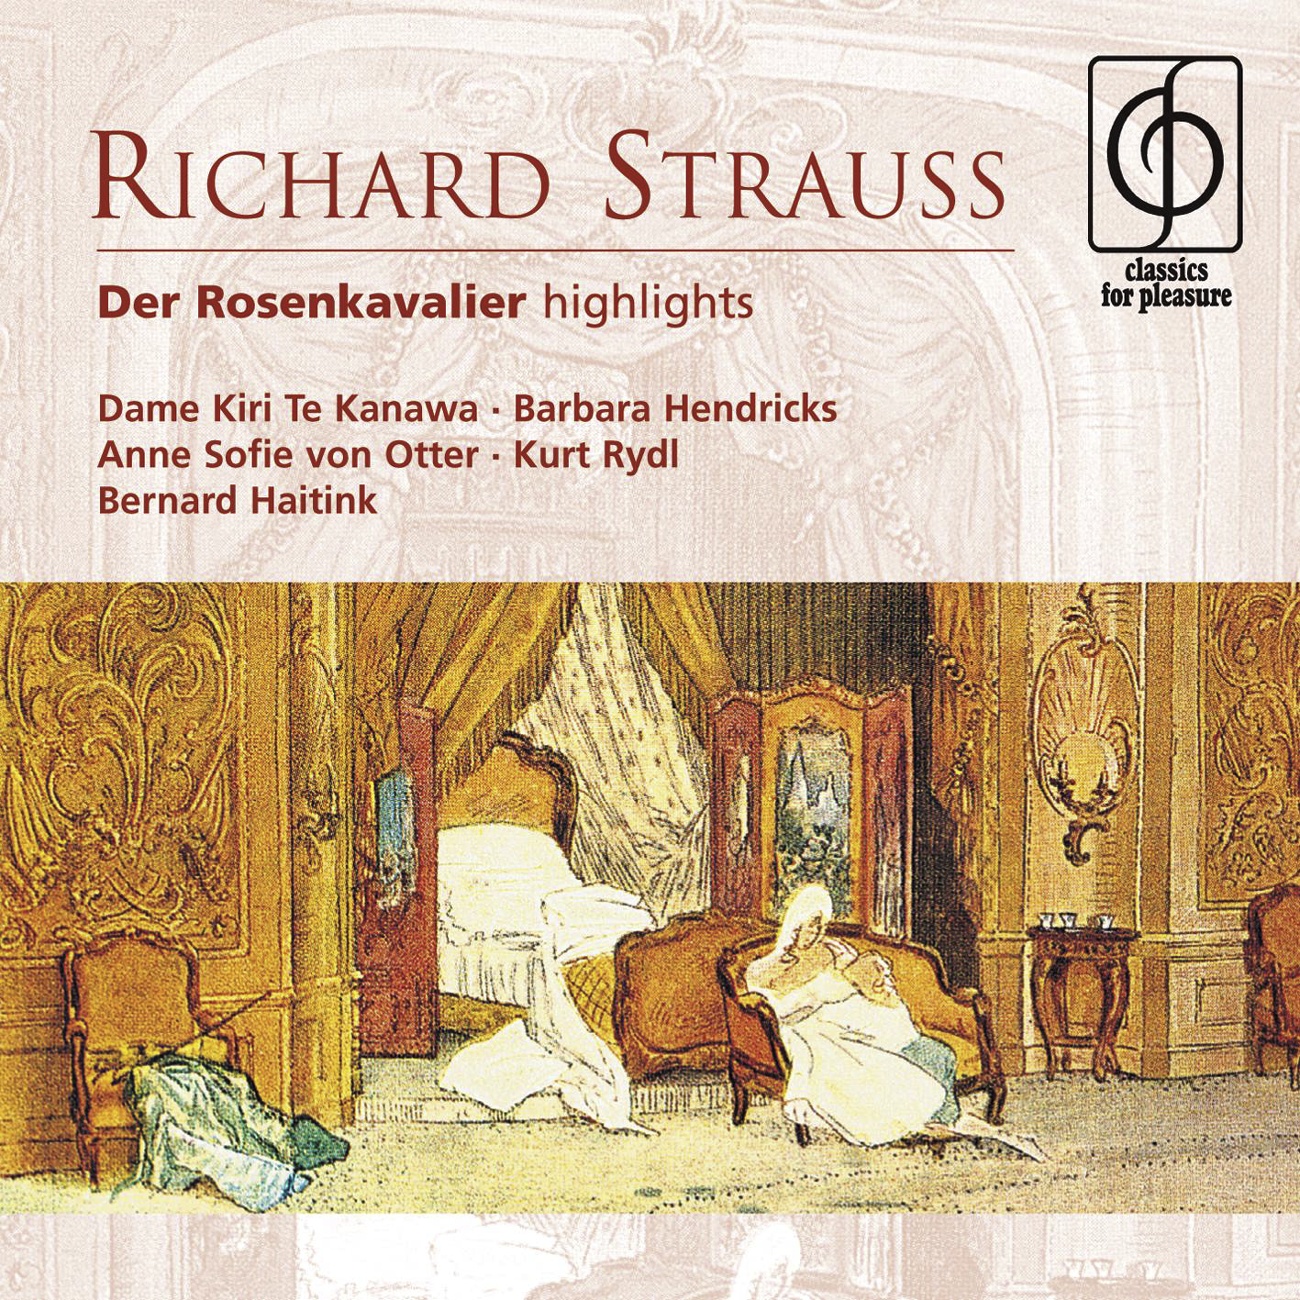 Der Rosenkavalier (highlights), Act I: Introduction (Orchestra)...